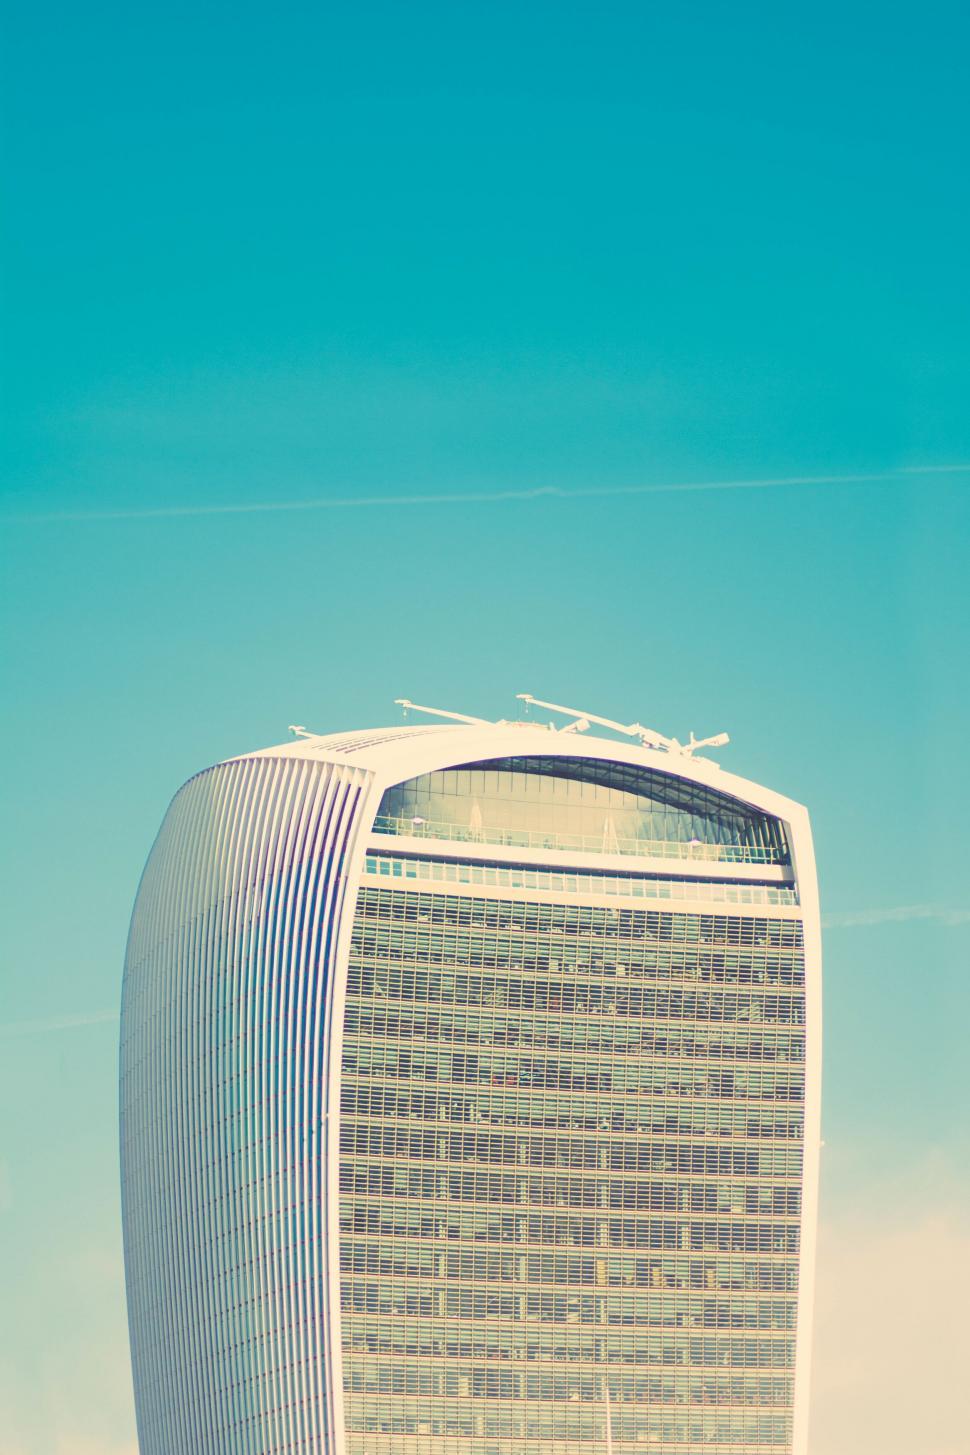 Free Image of A tall building with a curved roof 